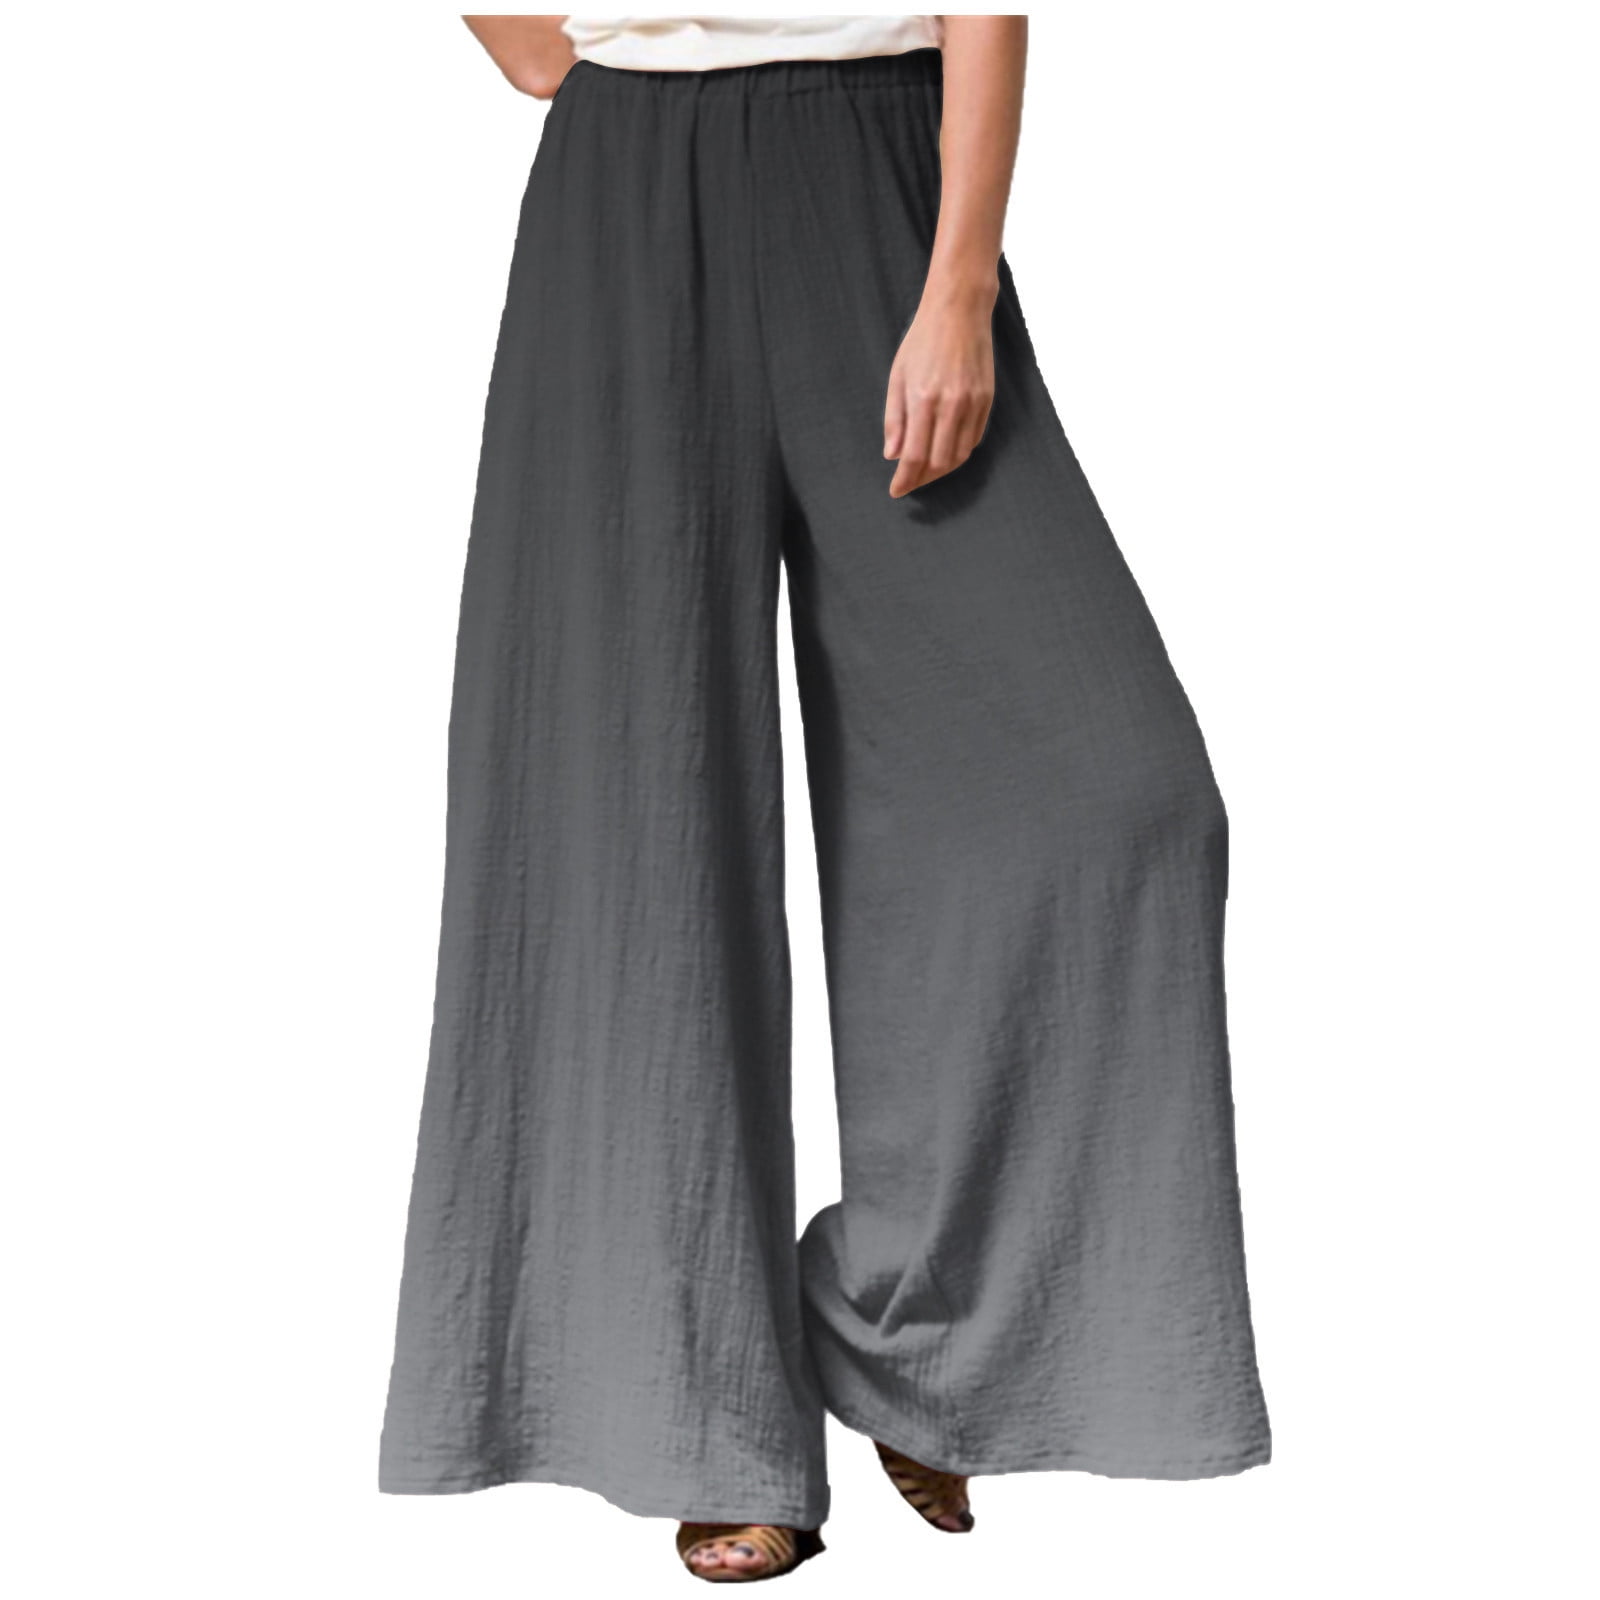 Zodggu Women Fashion Women Summer Bow Summer Casual Loose High Waist Full  Length Long Pants Pleated Wide Solid Trousers Pants Trendy Comfy Loose Fit